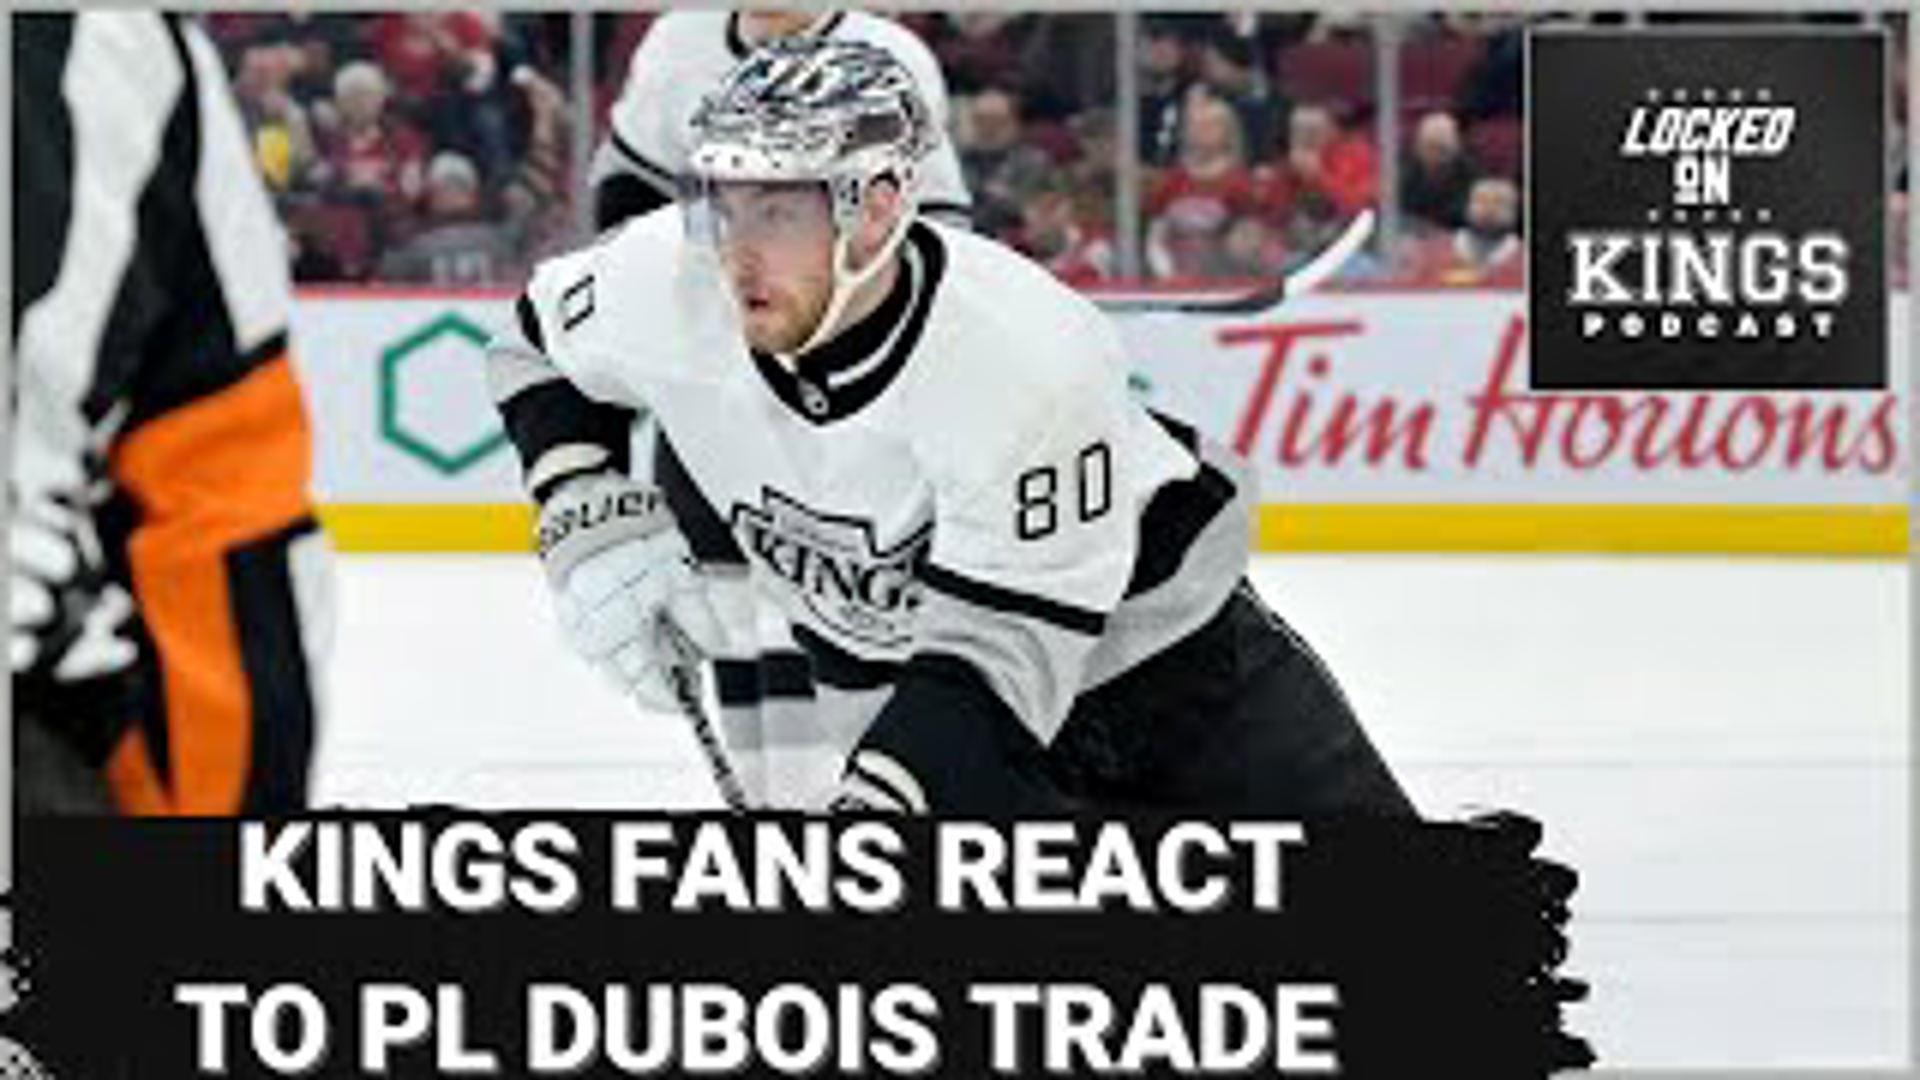 It’s a Kings Fan Feedback show, with lots of comments on the Pierre Luc Dubois trade for Darcy Kuemper, mixed reactions on the job GM Rob Blake is doing and more!